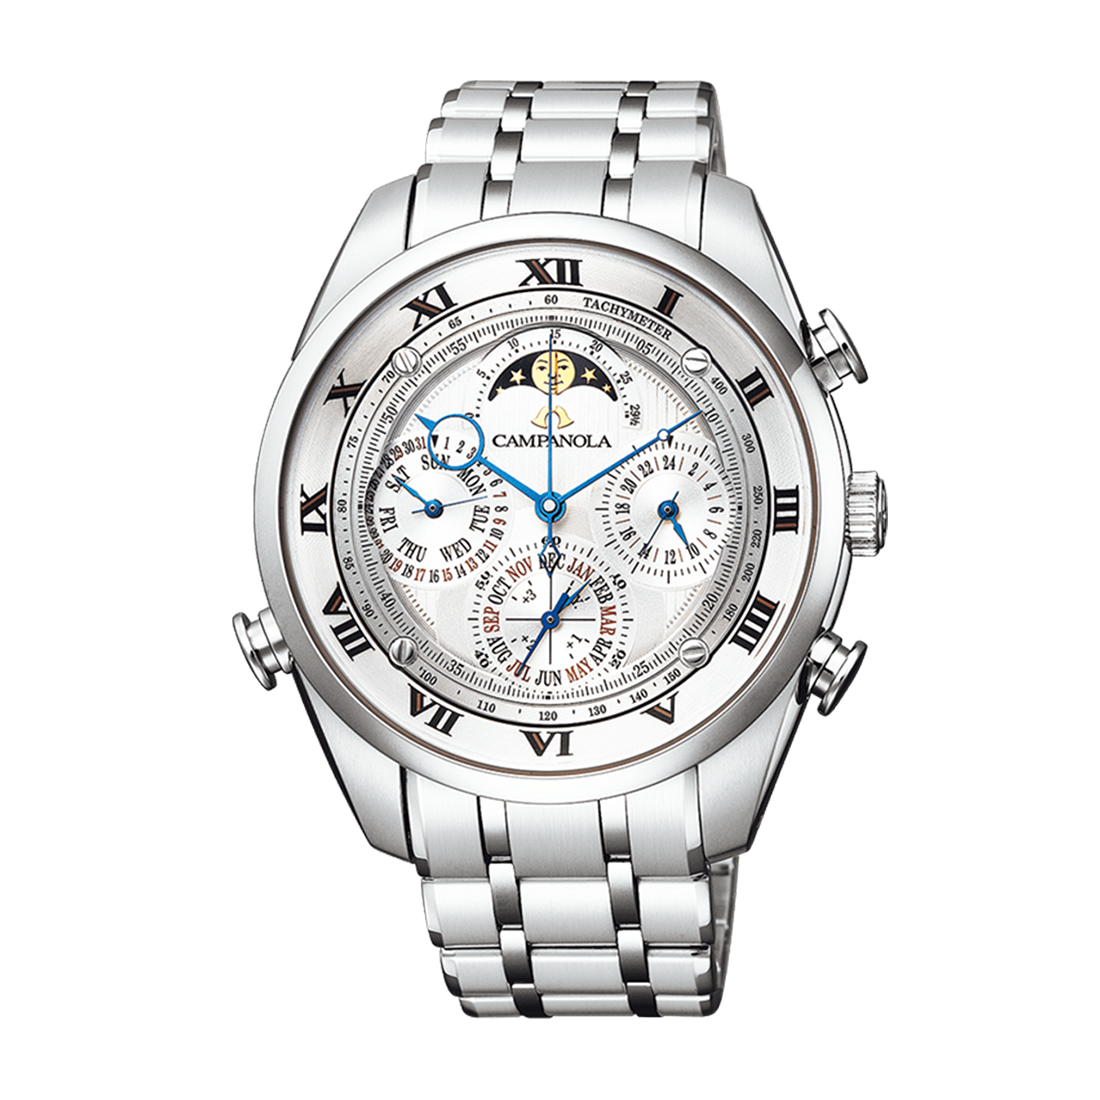 COMPLICATION COLLECTION Grand Complication AH4080-52A